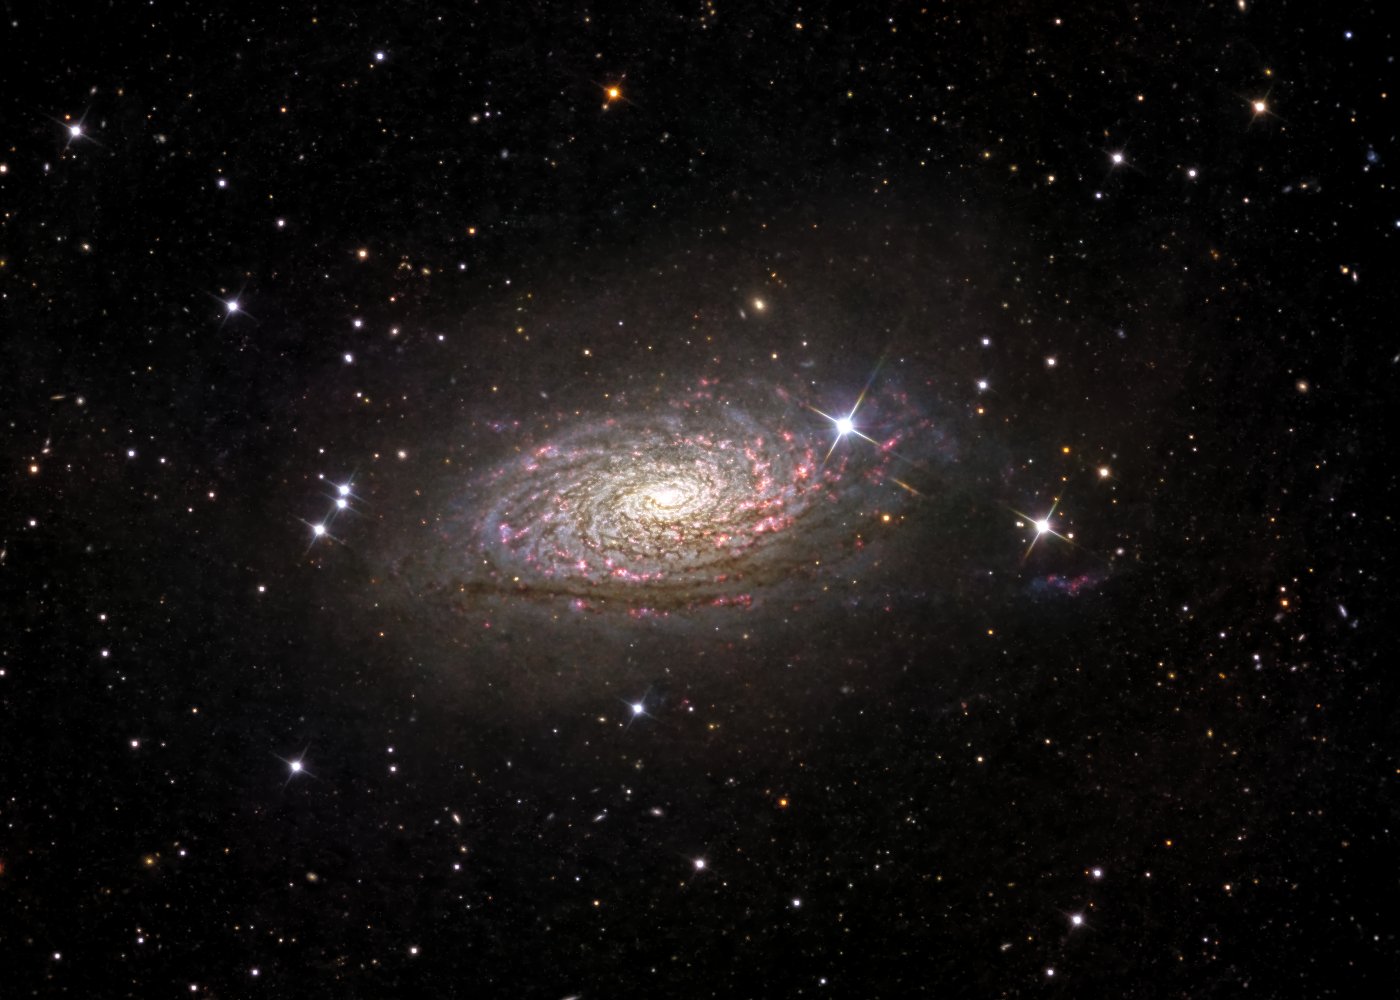 M63 in H-alpha and continuum light